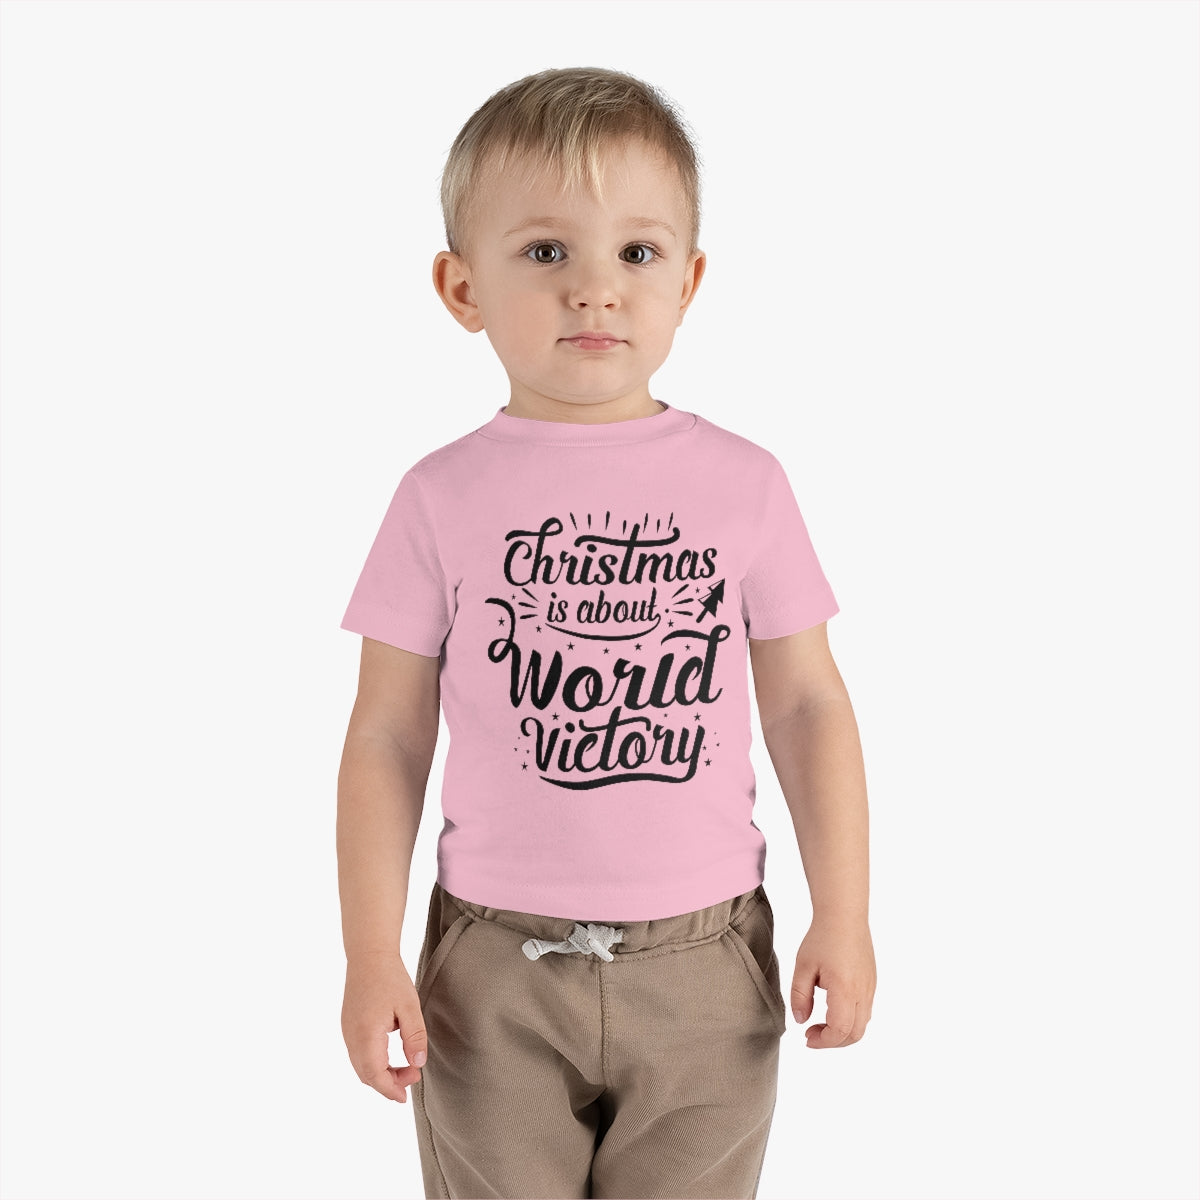 Christmas is about World victory Christmas Tee, Baby Tee, Infant Tee, Christmas Baby Tee